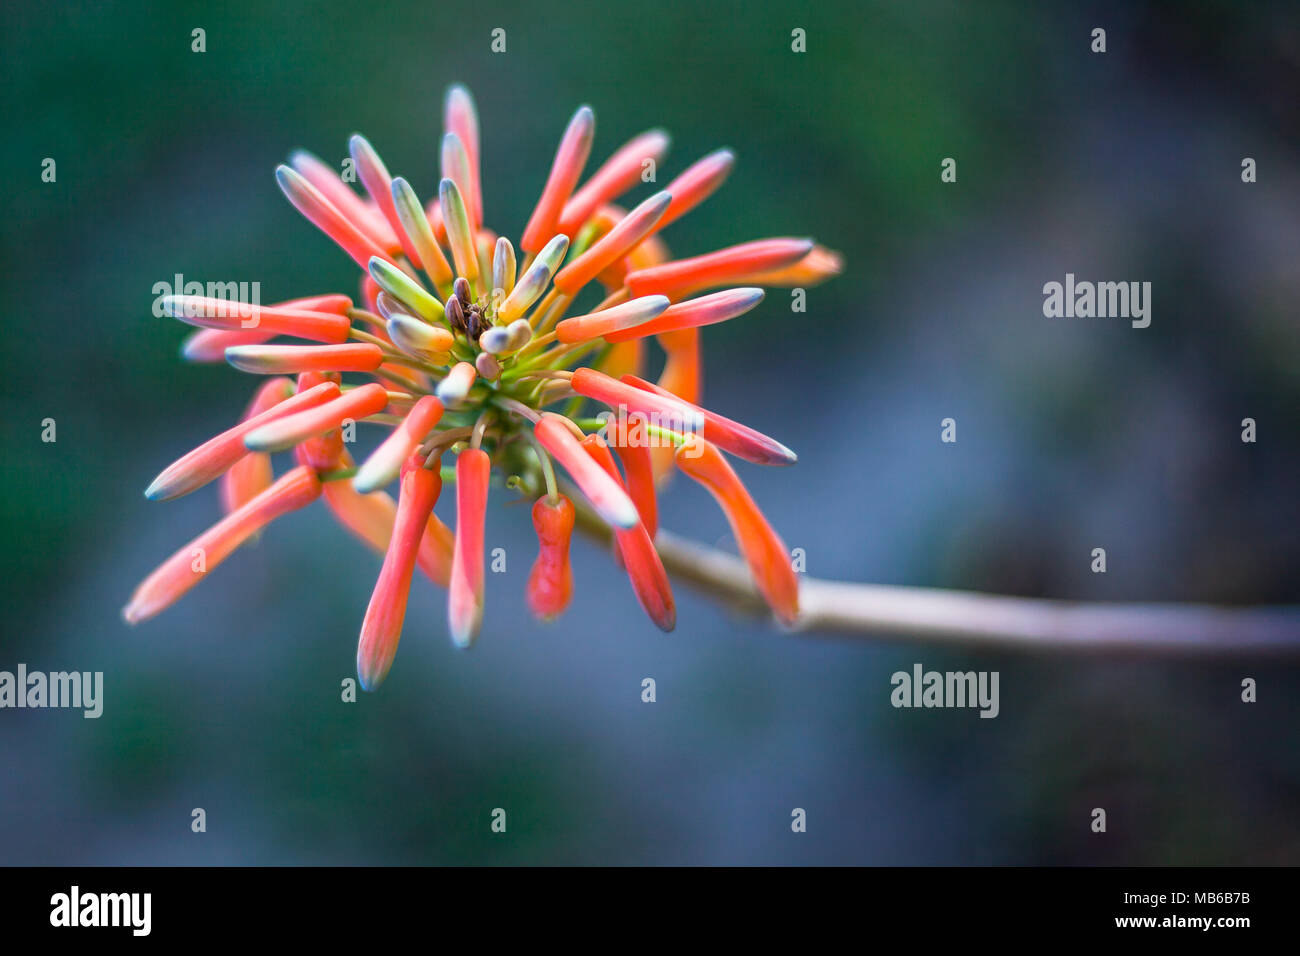 Aloe vera flower bright orange to green, shaped like a cluster of fingers Stock Photo